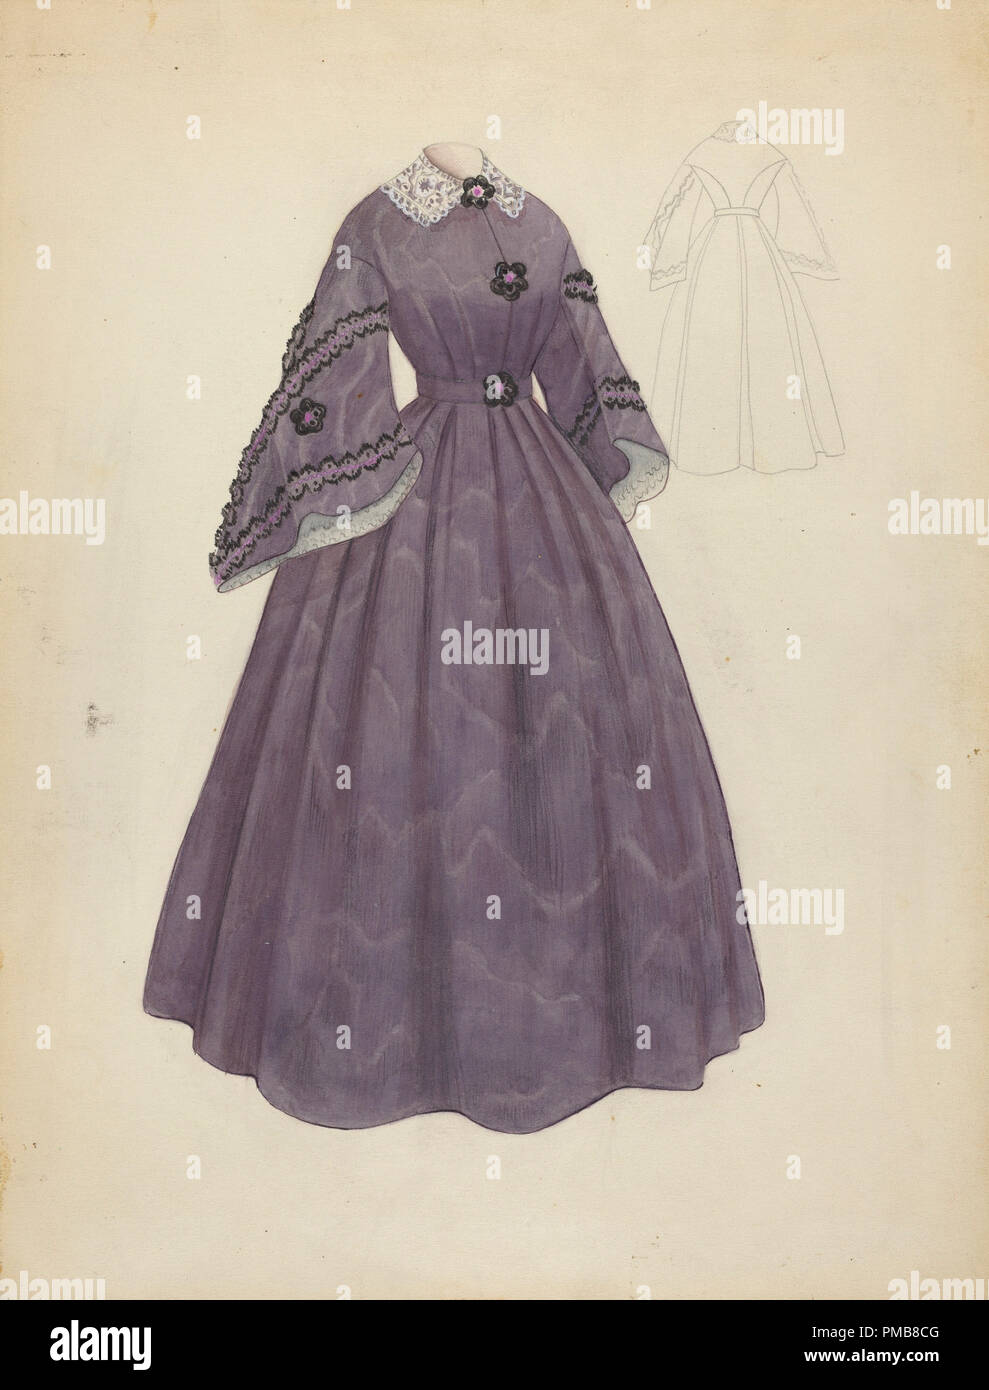 Dress. Dated: c. 1940. Dimensions: overall: 29.9 x 23 cm (11 3/4 x 9 1/16 in.)  Original IAD Object: 59 1/2' long. Medium: watercolor and graphite on paperboard. Museum: National Gallery of Art, Washington DC. Author: Jessie M. Benge. Stock Photo